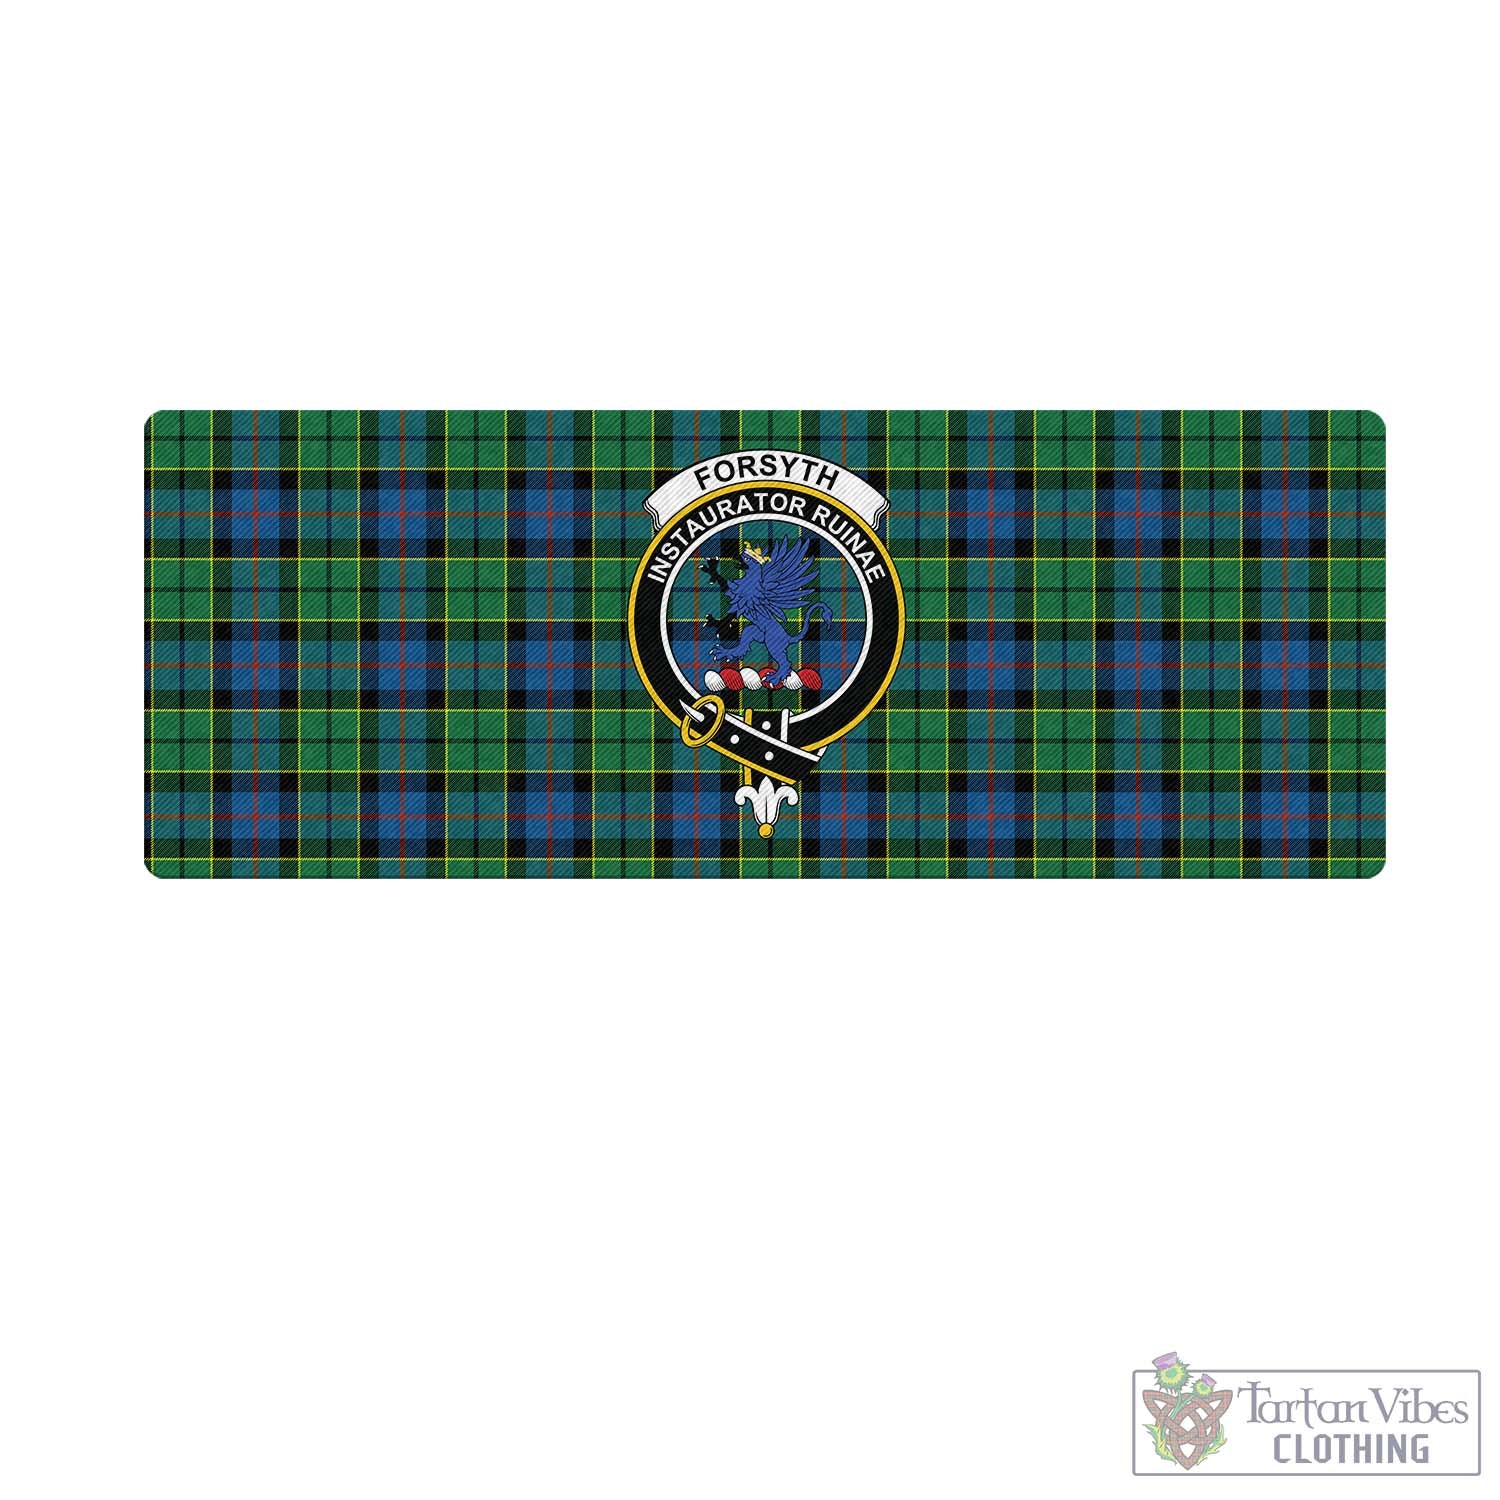 Tartan Vibes Clothing Forsyth Ancient Tartan Mouse Pad with Family Crest